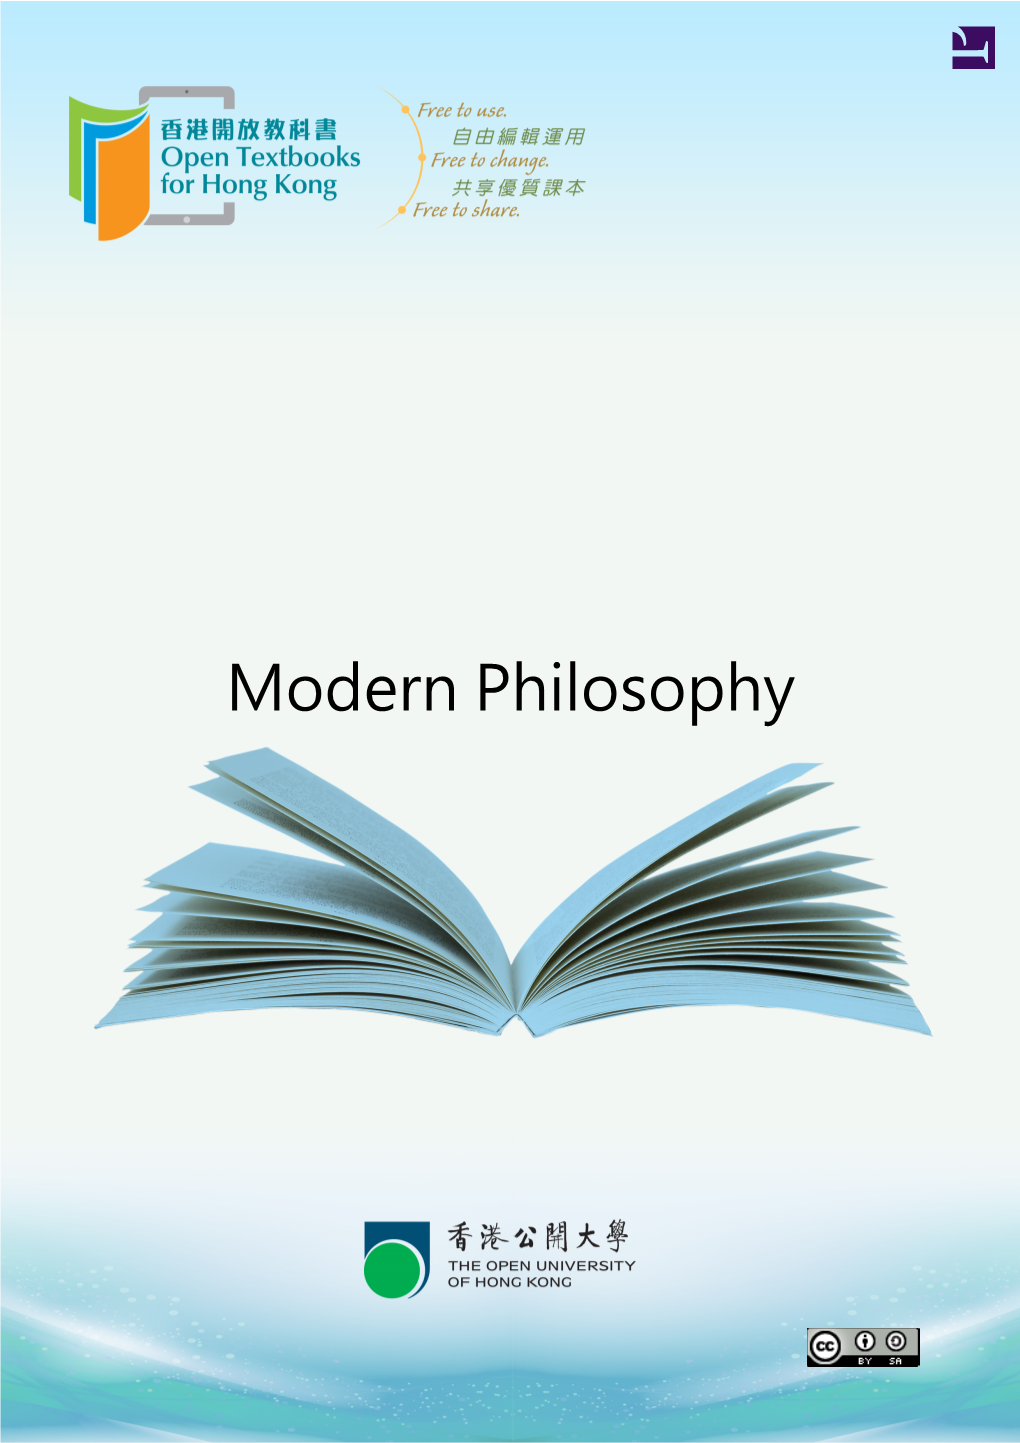 Modern Philosophy This Work Is Licensed Under a Creative Commons-Sharealike 4.0 International License